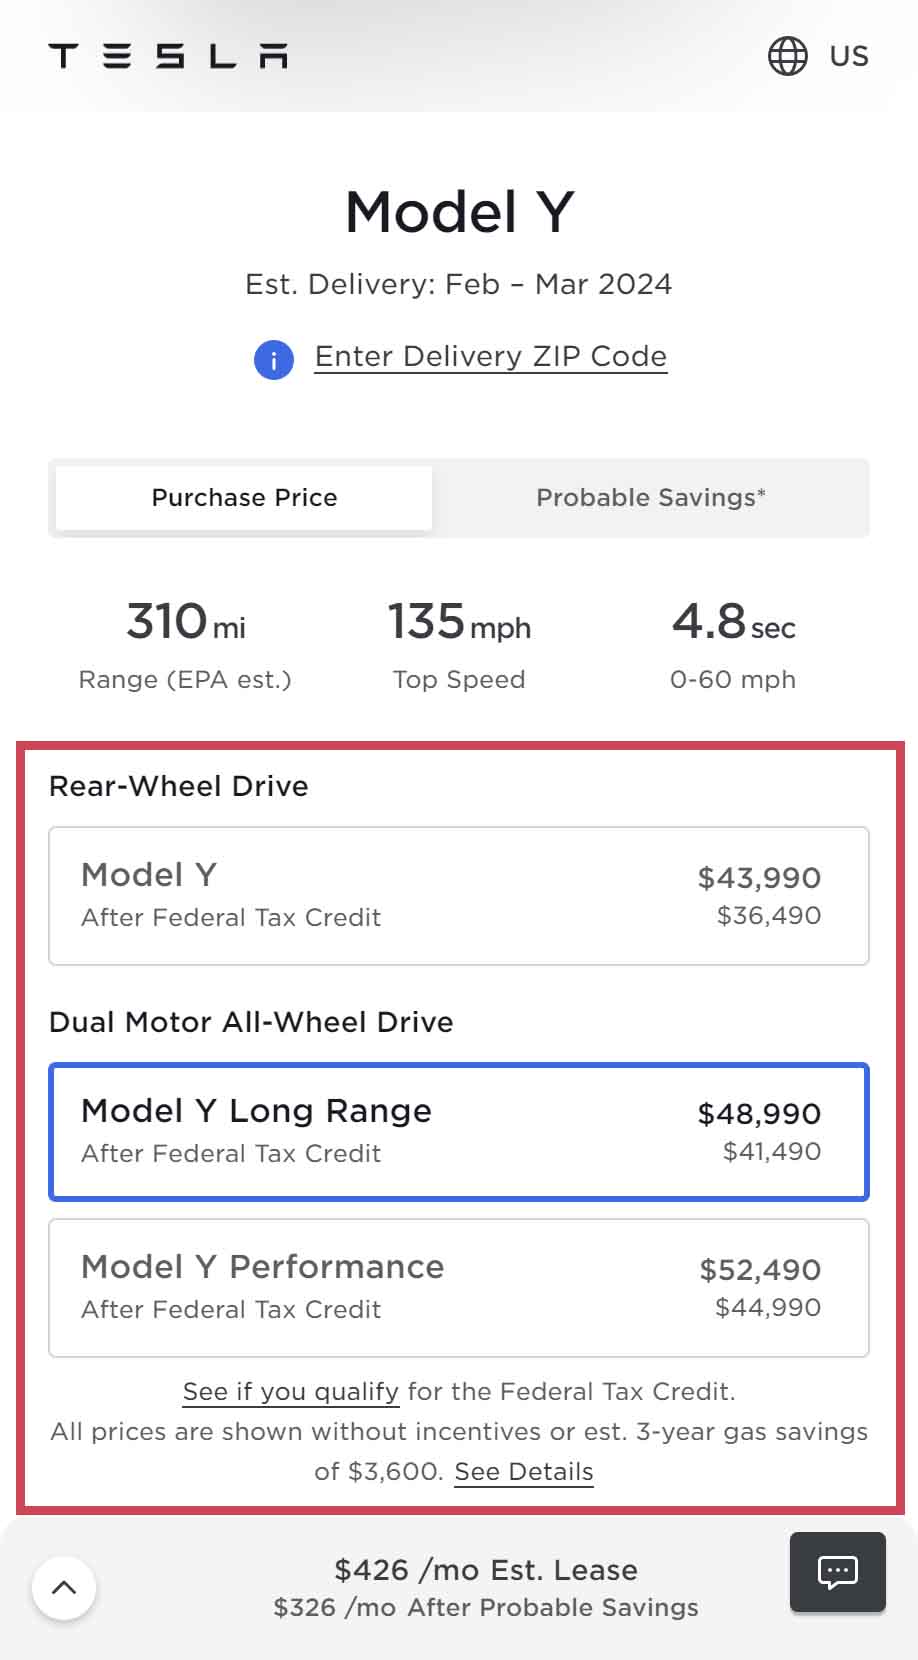 Tesla showing after federal tax credit prices